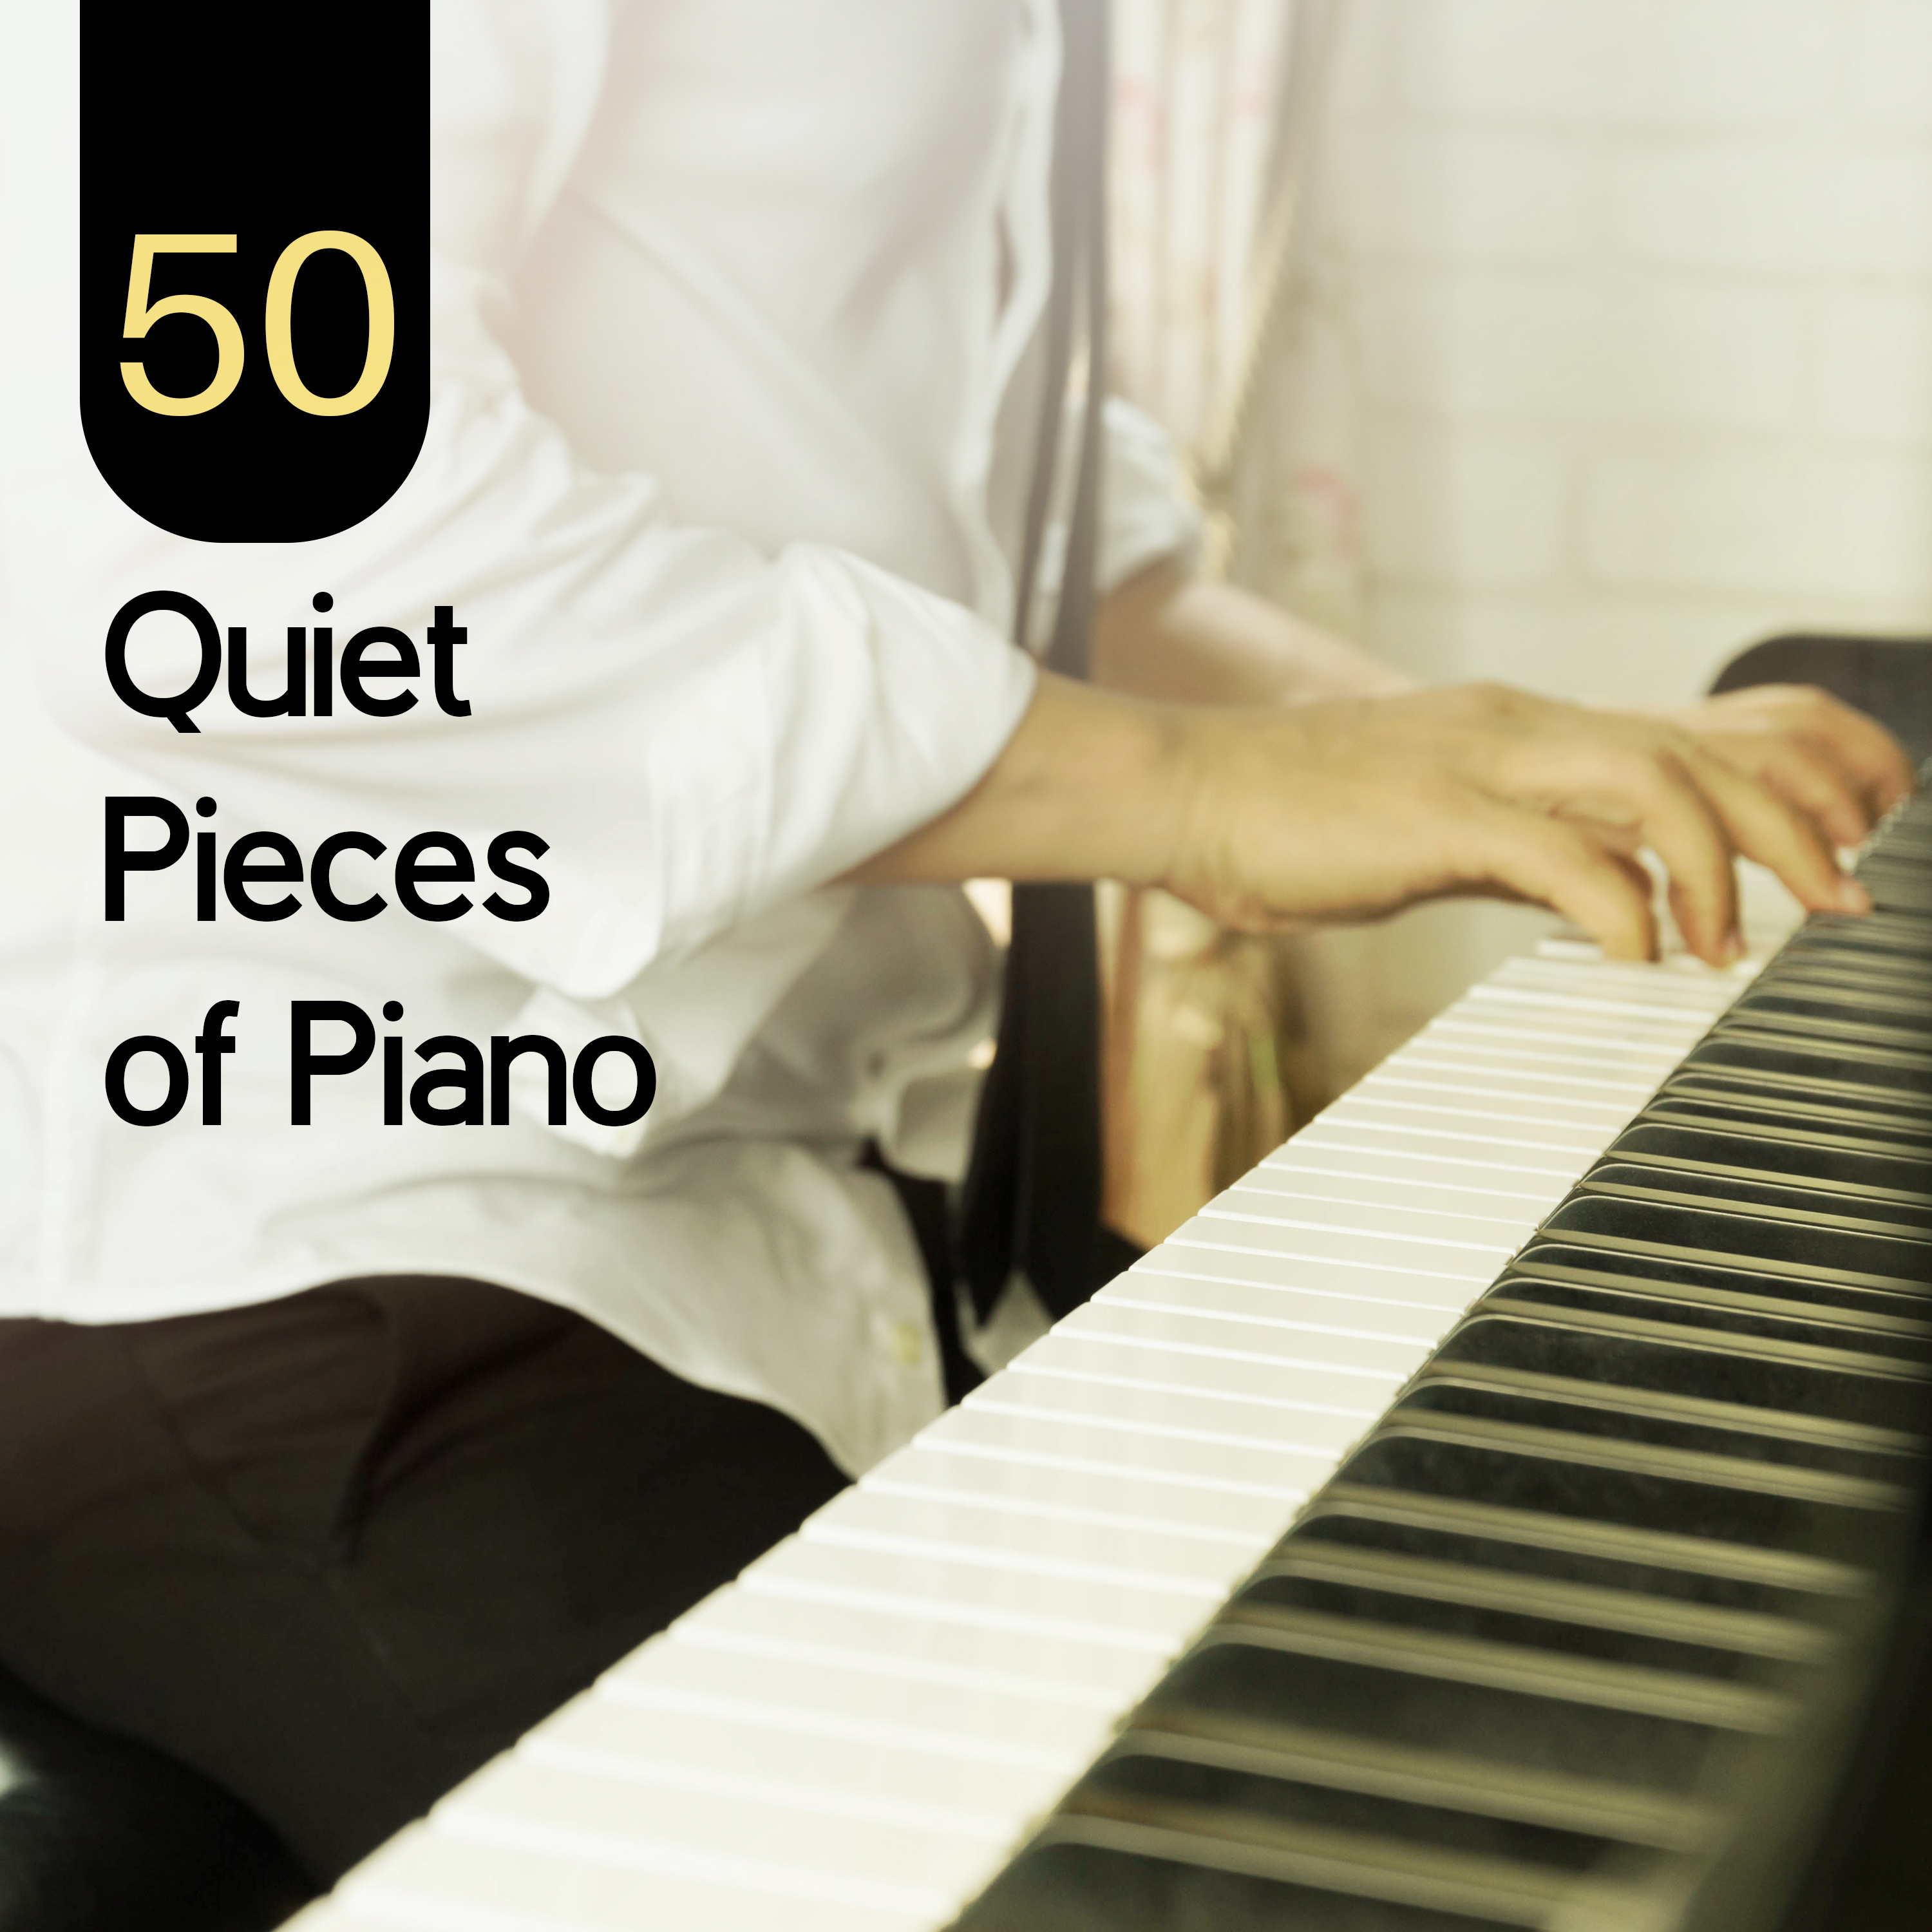 50 Quiet Pieces of Piano (Emotional Piano Jazz Collection, Smooth Instrumental Background)